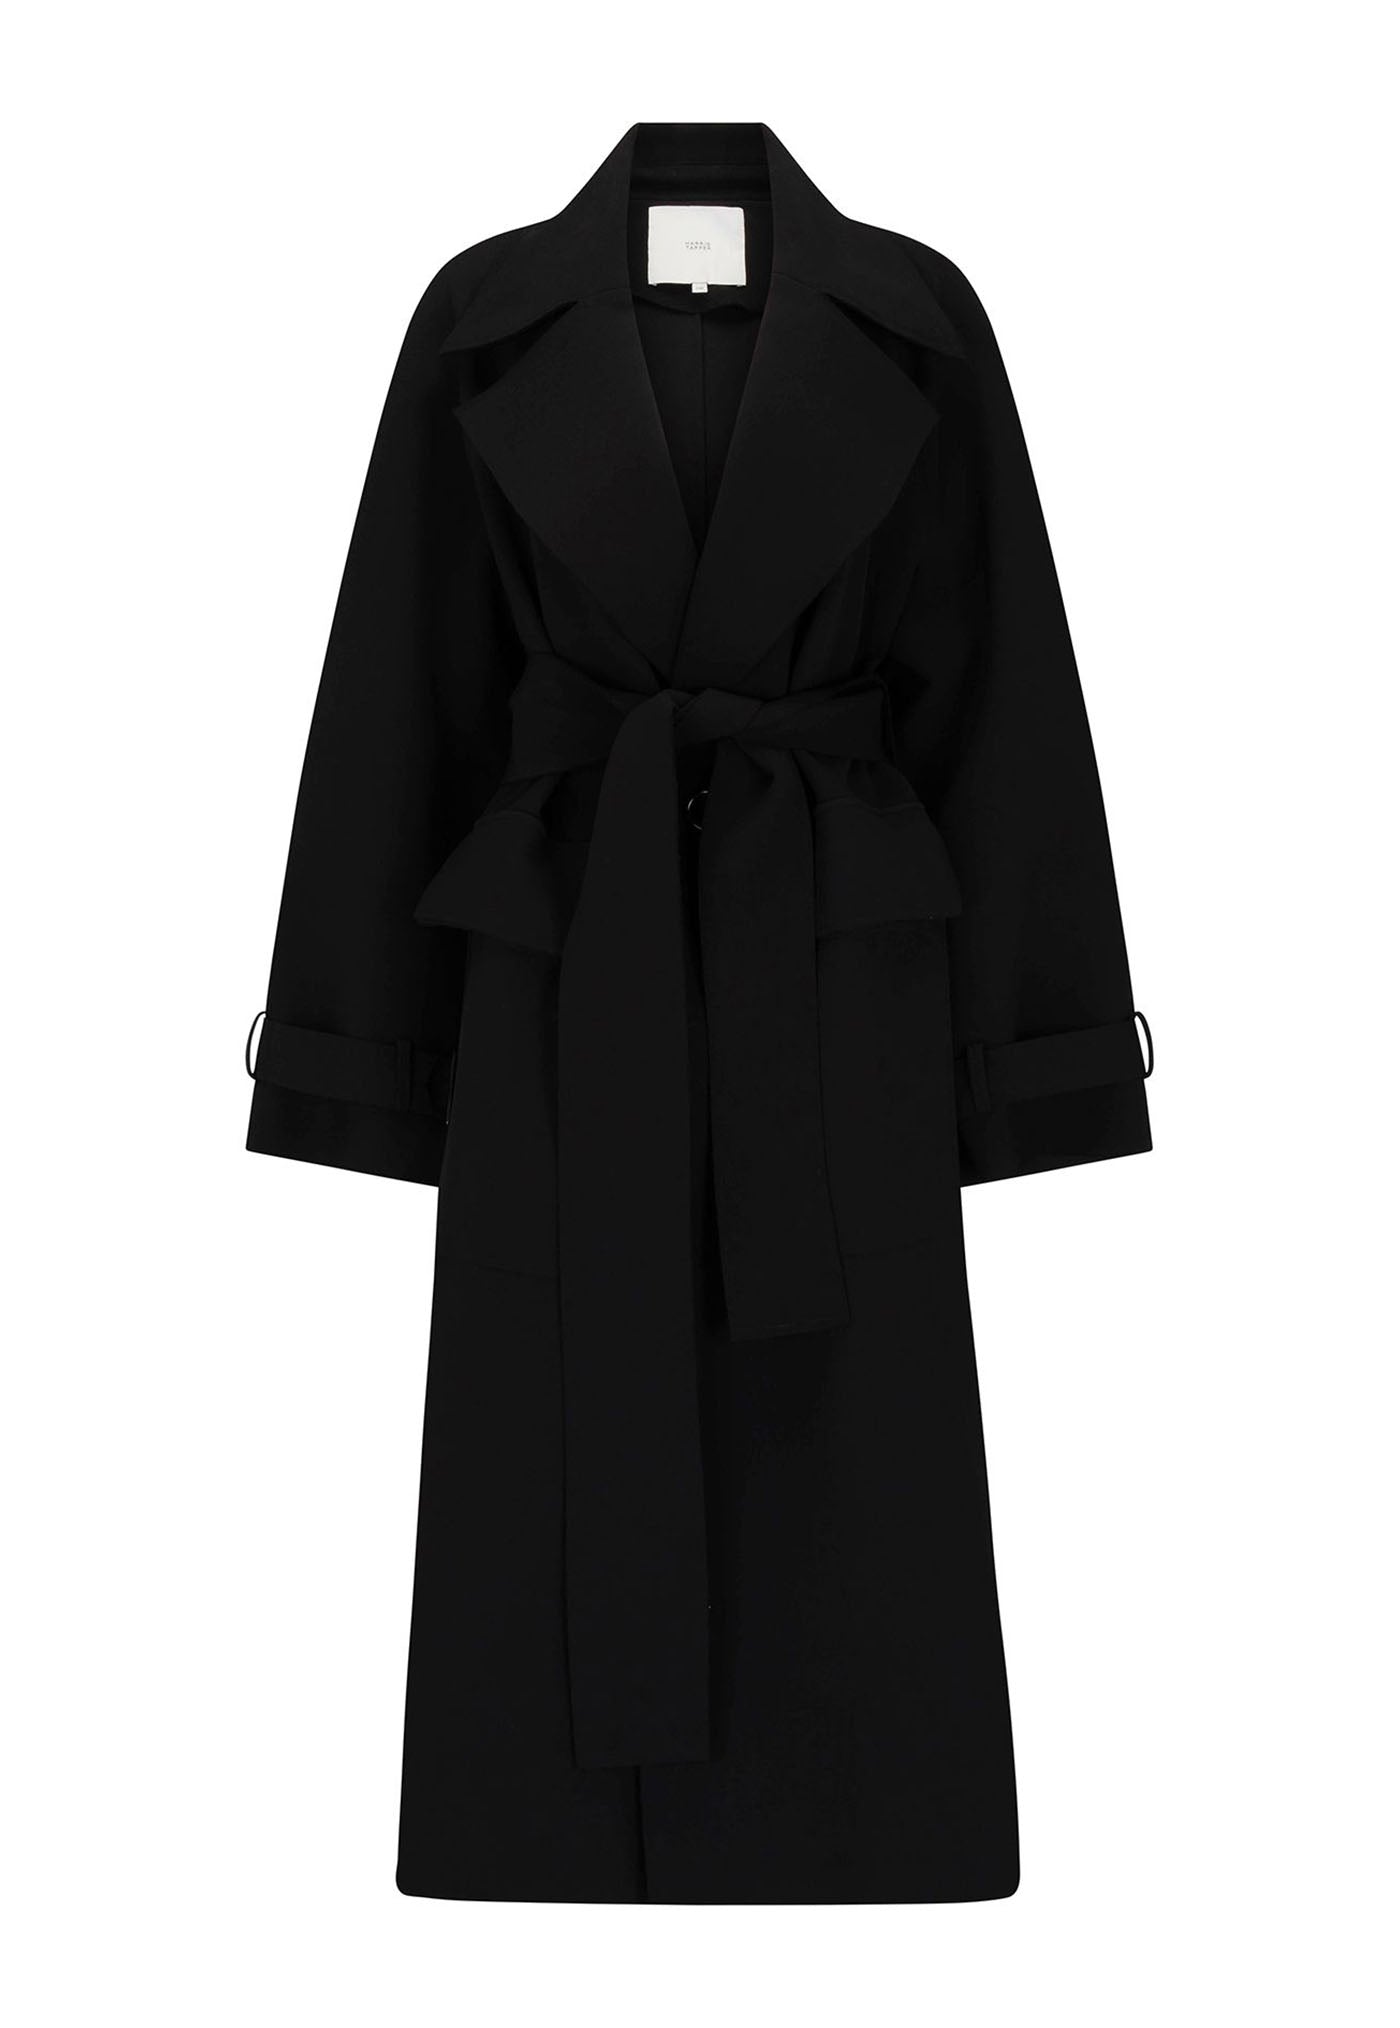 Miller Trench - Black sold by Angel Divine